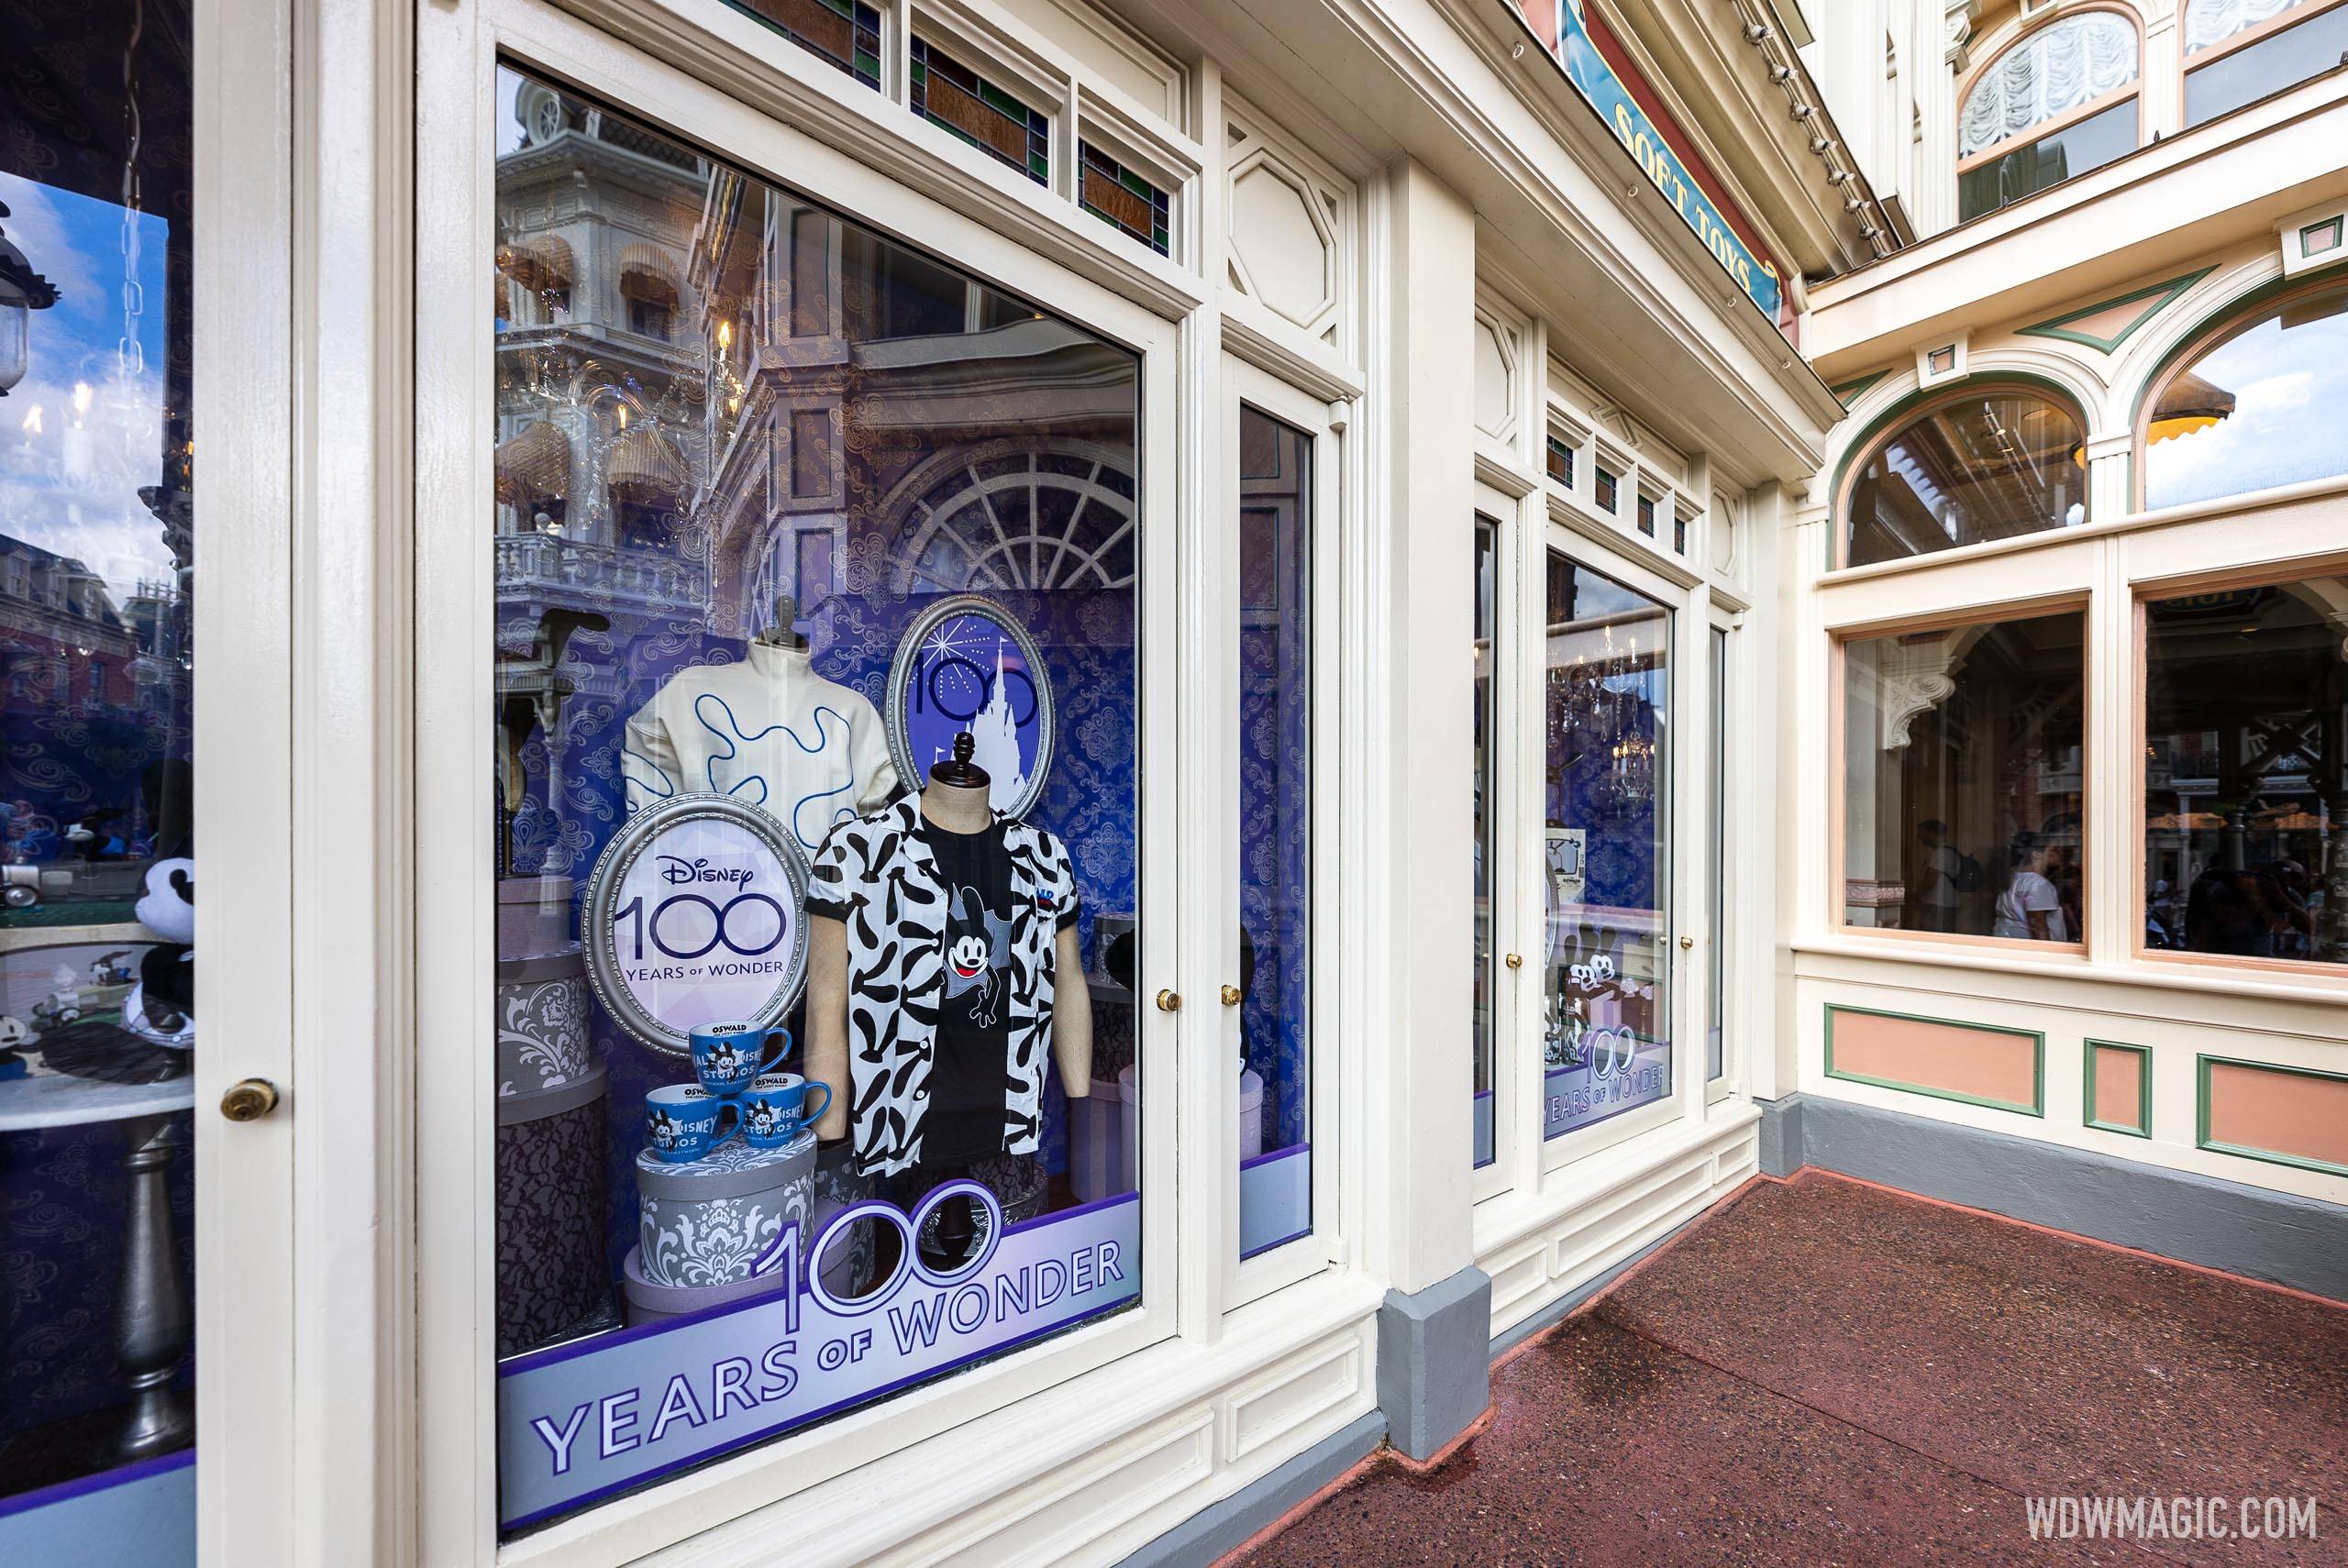 Another Store Taken Over by Magical Disney100 Merchandise 